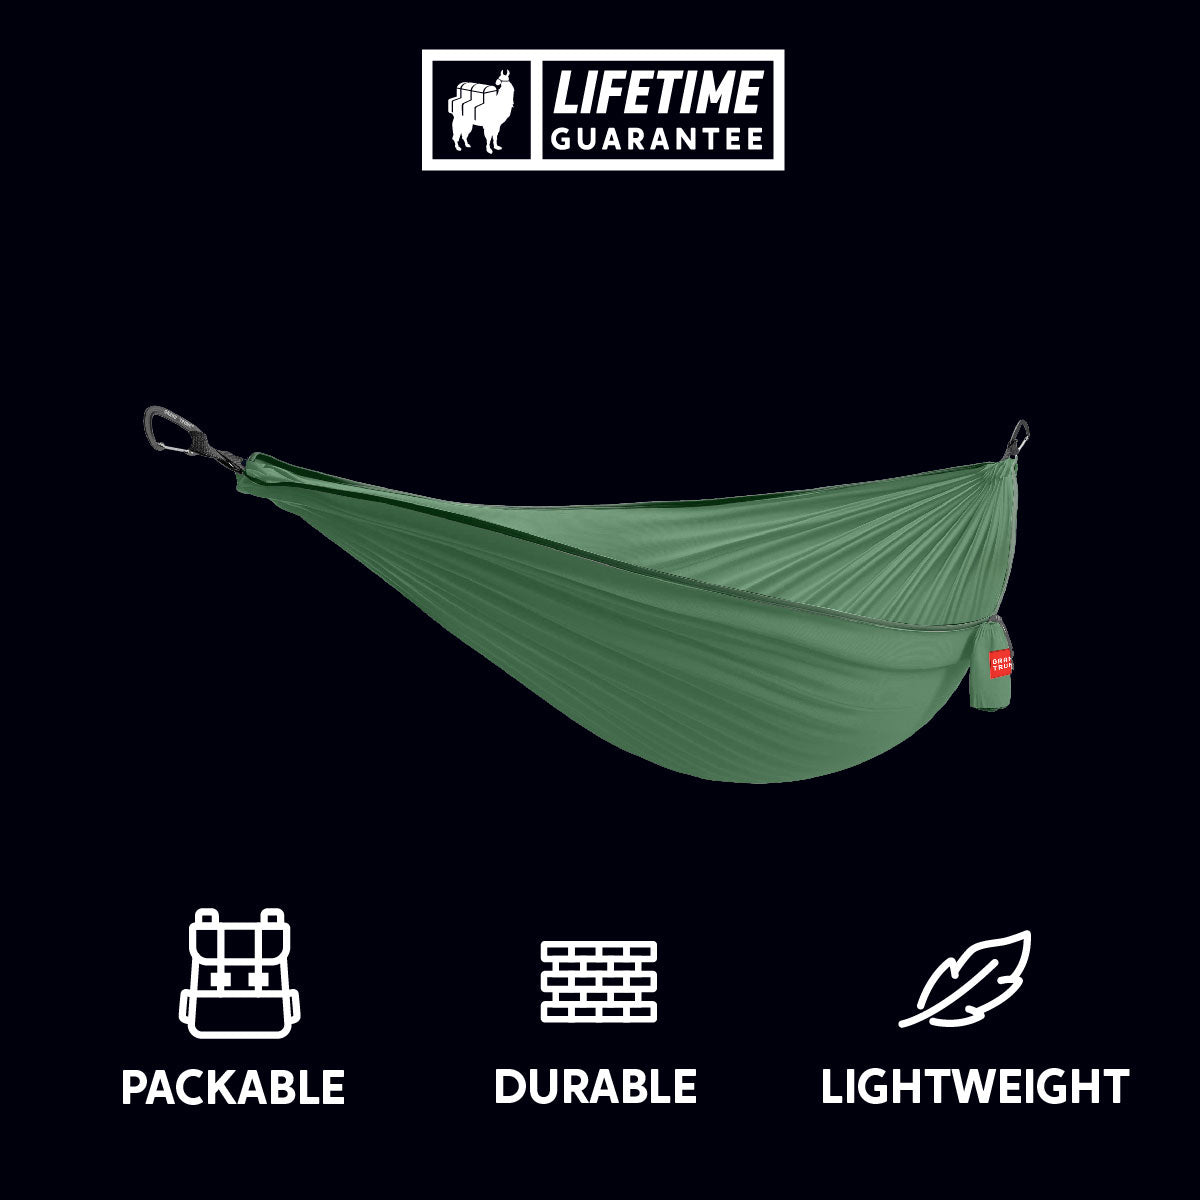 packable, durable, lightweight, affordable green hammock ripstop